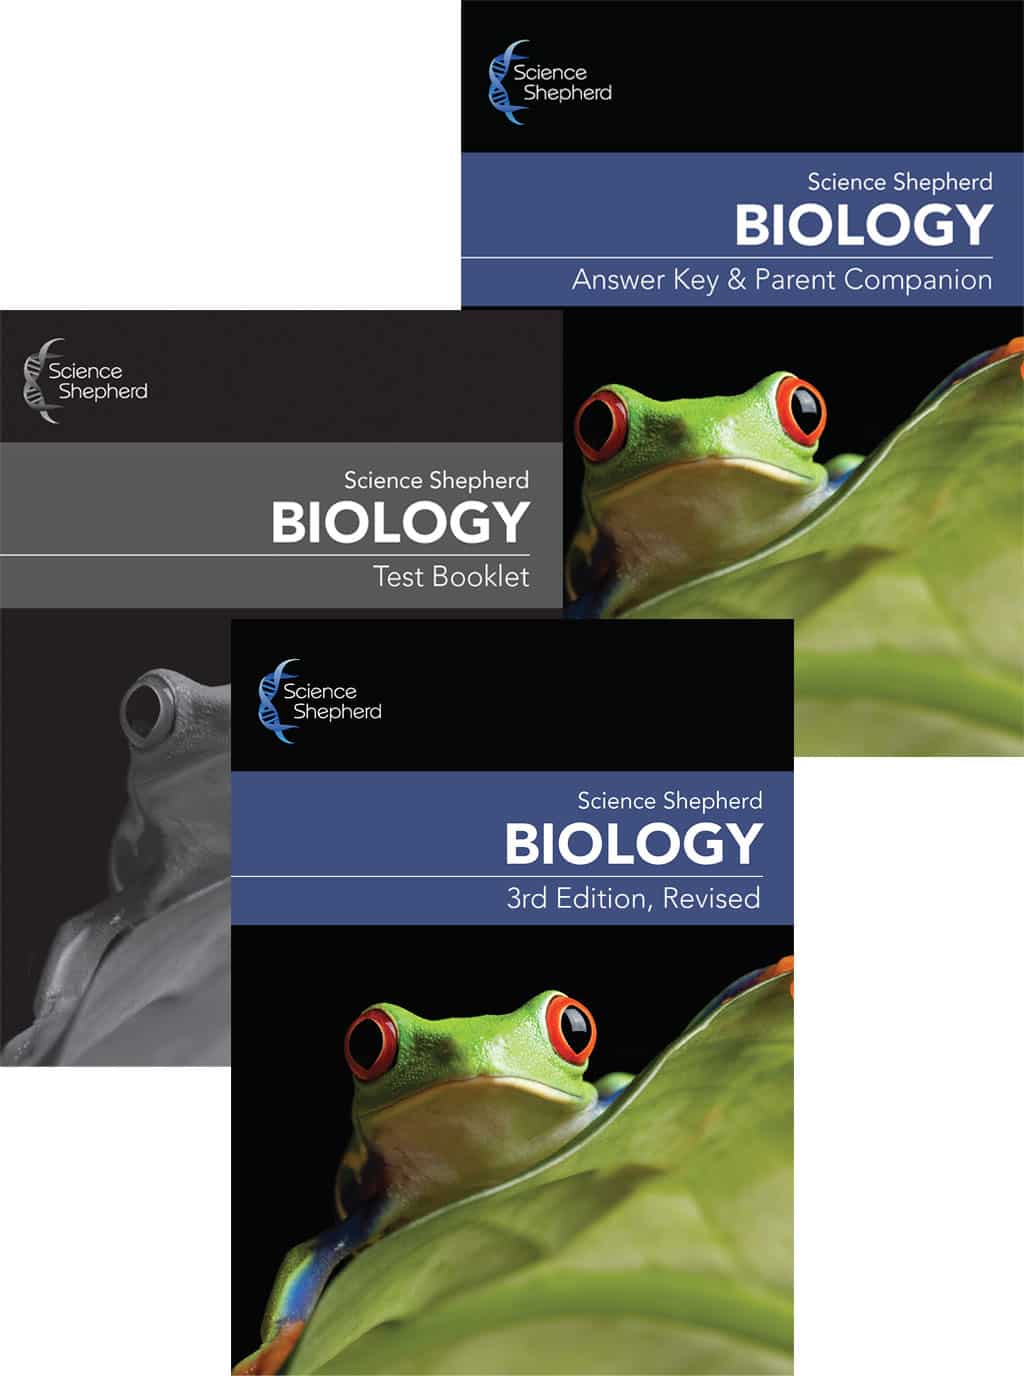 Christian homeschool Biology curriculum 3-Book Set cover with textbook, test booklet and parent book